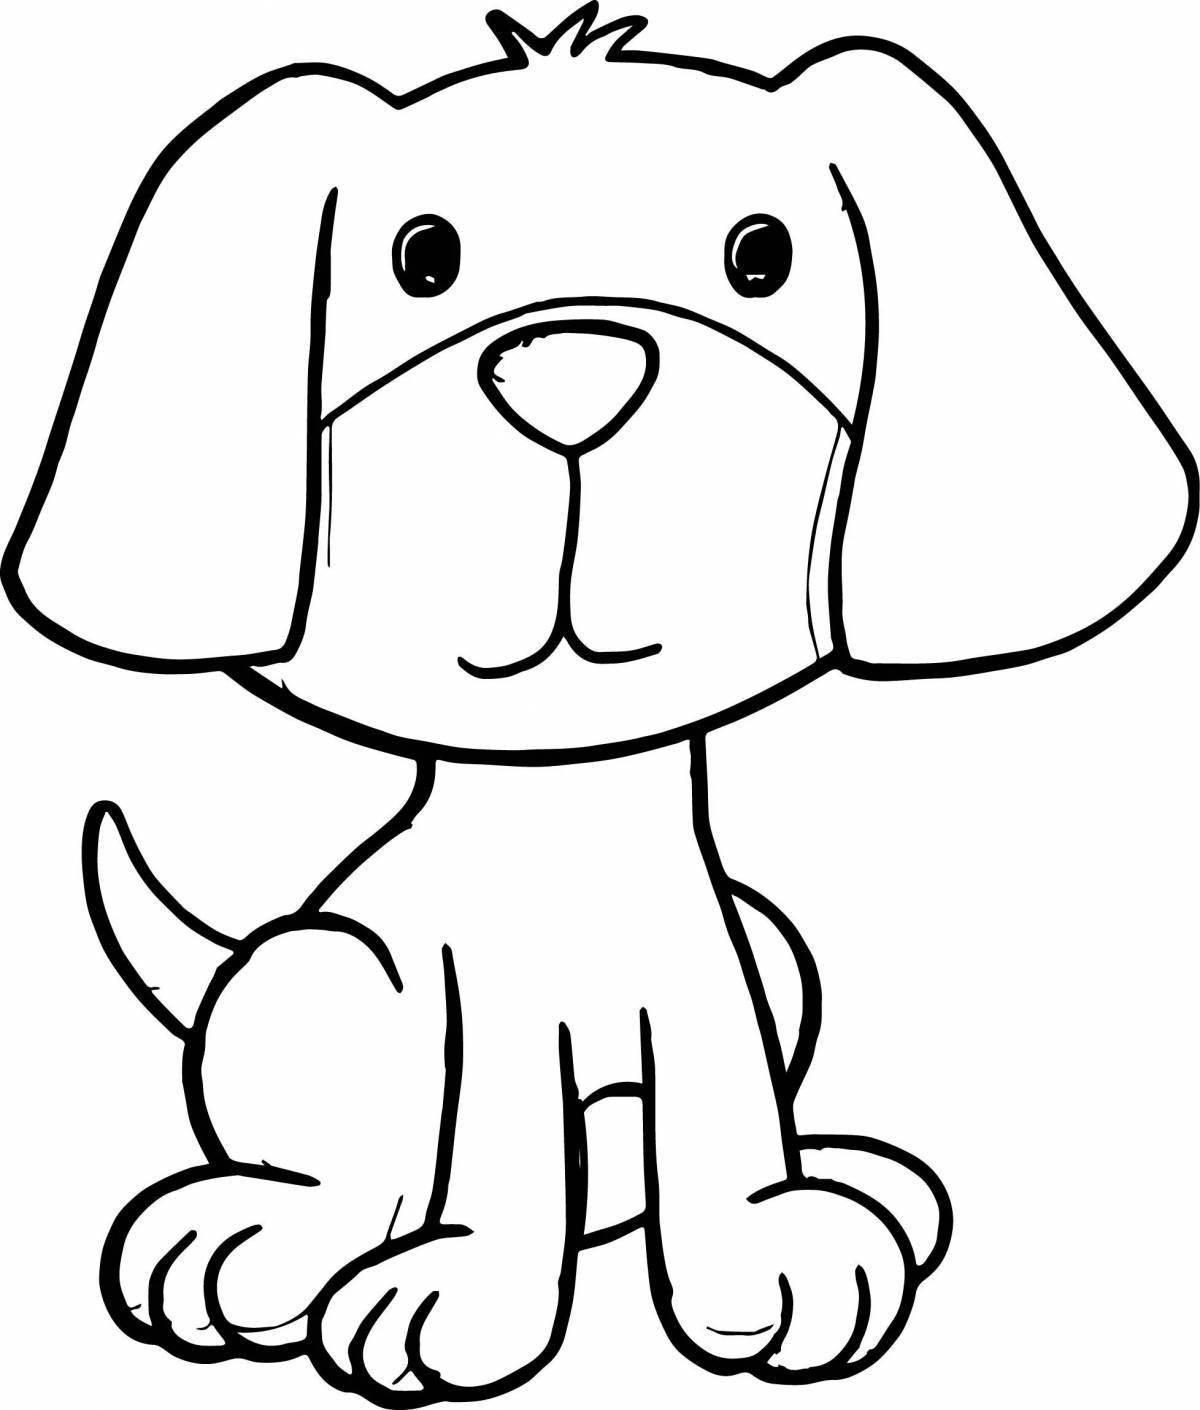 Puppy waggish coloring page for kids